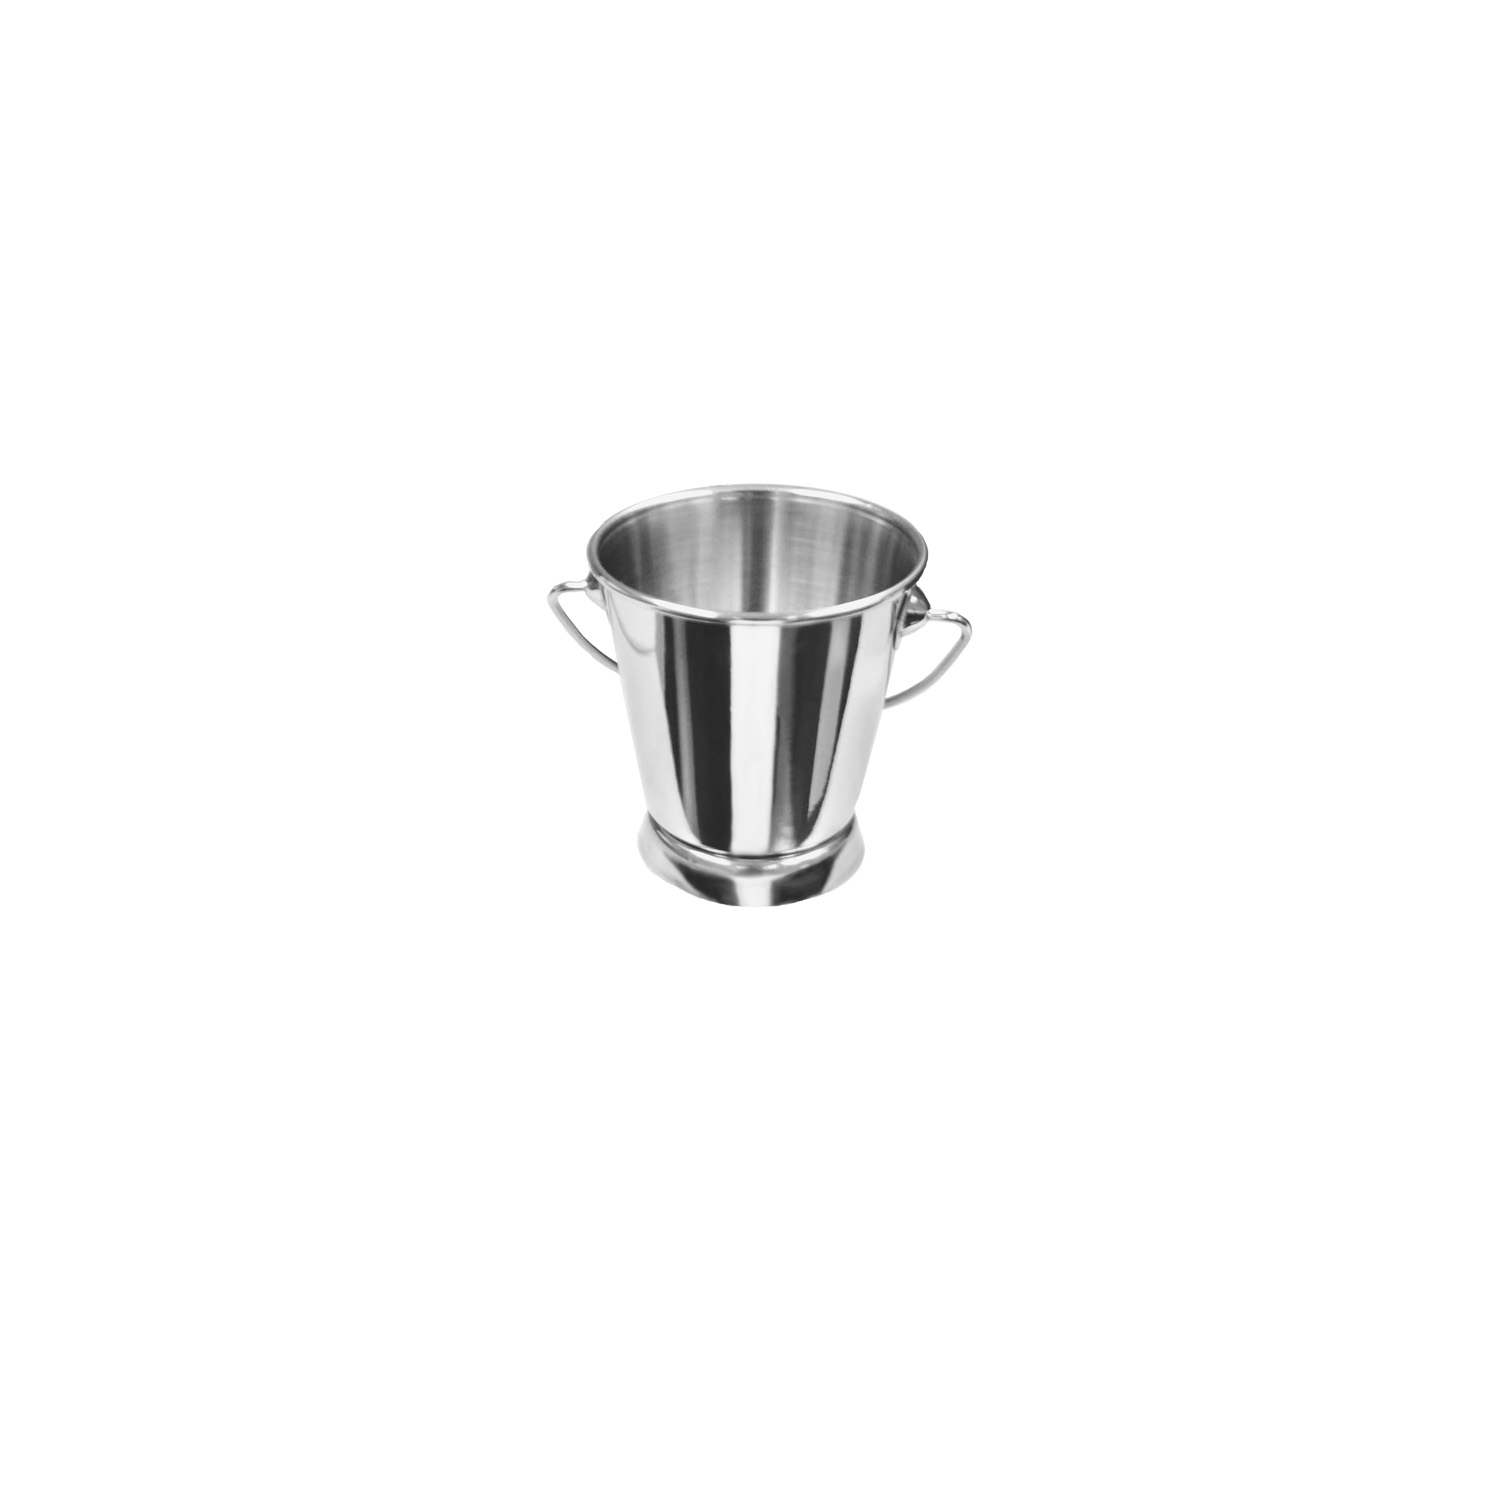 CAC China SMPL-35S Stainless Steel Mini Serving Pail with Smooth Handle 3 1/2" Dia x 3 5/8" H